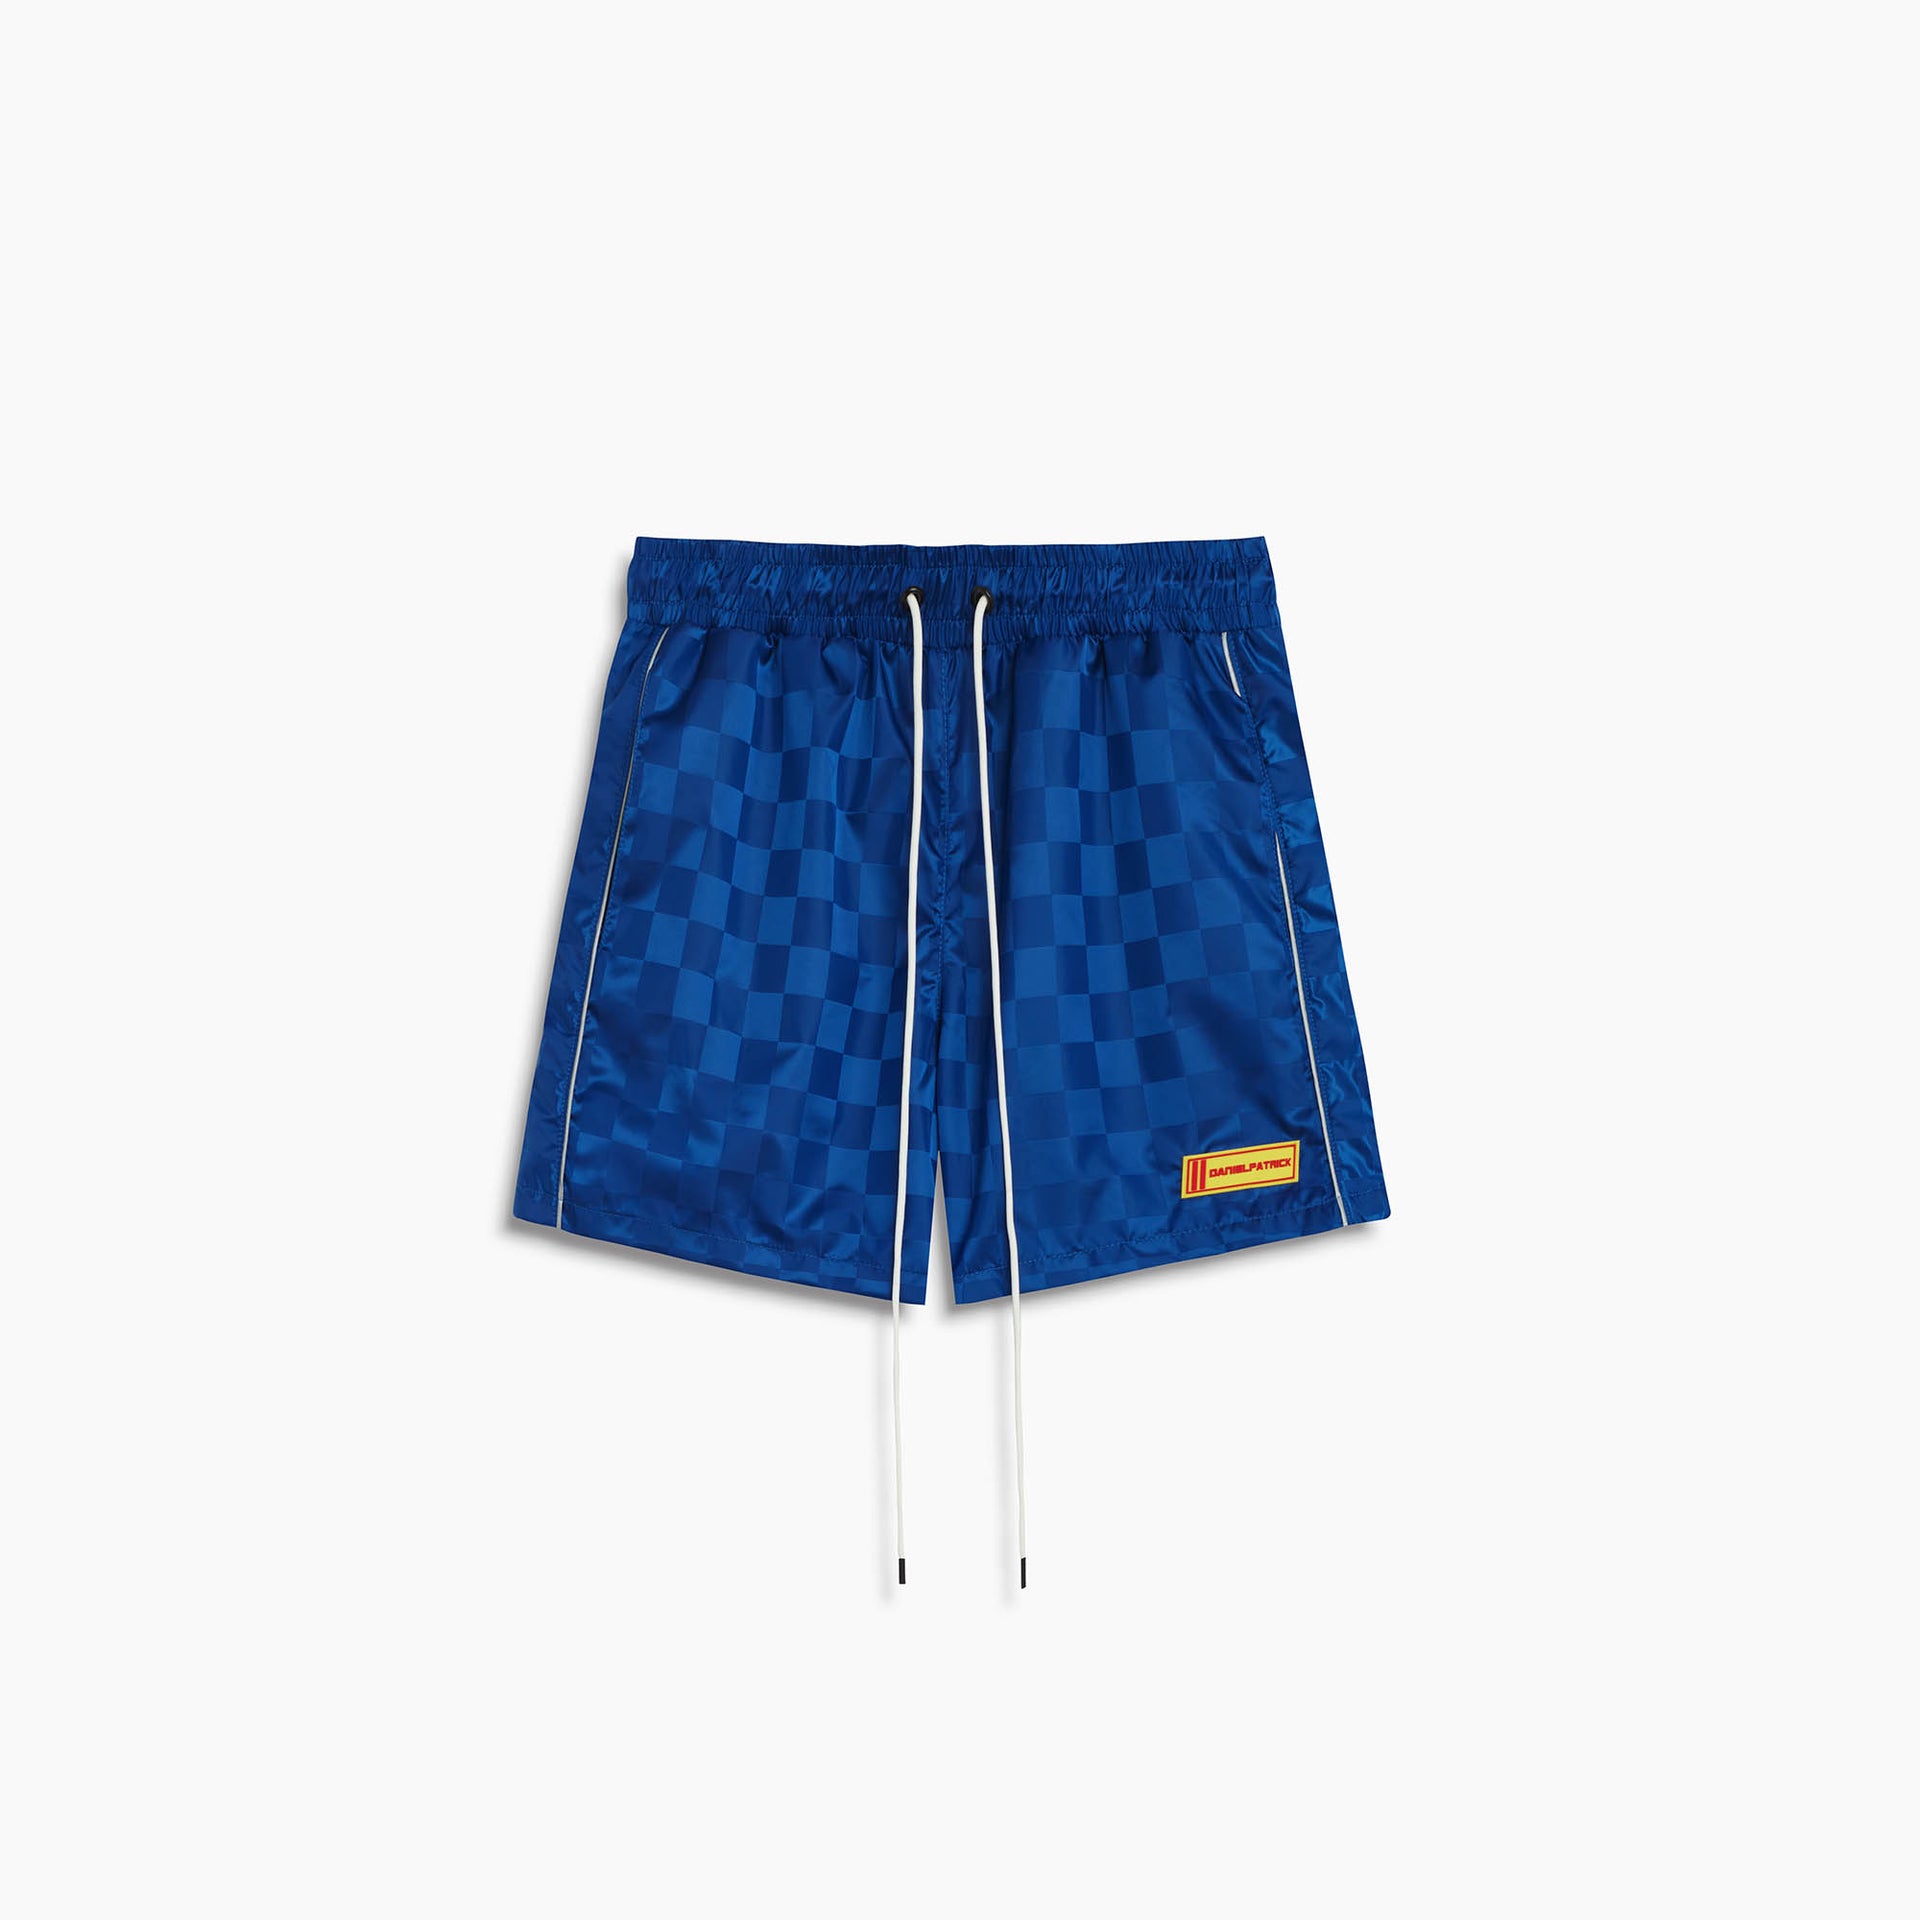 men’s blue checkered trunk shorts with drawstring waist